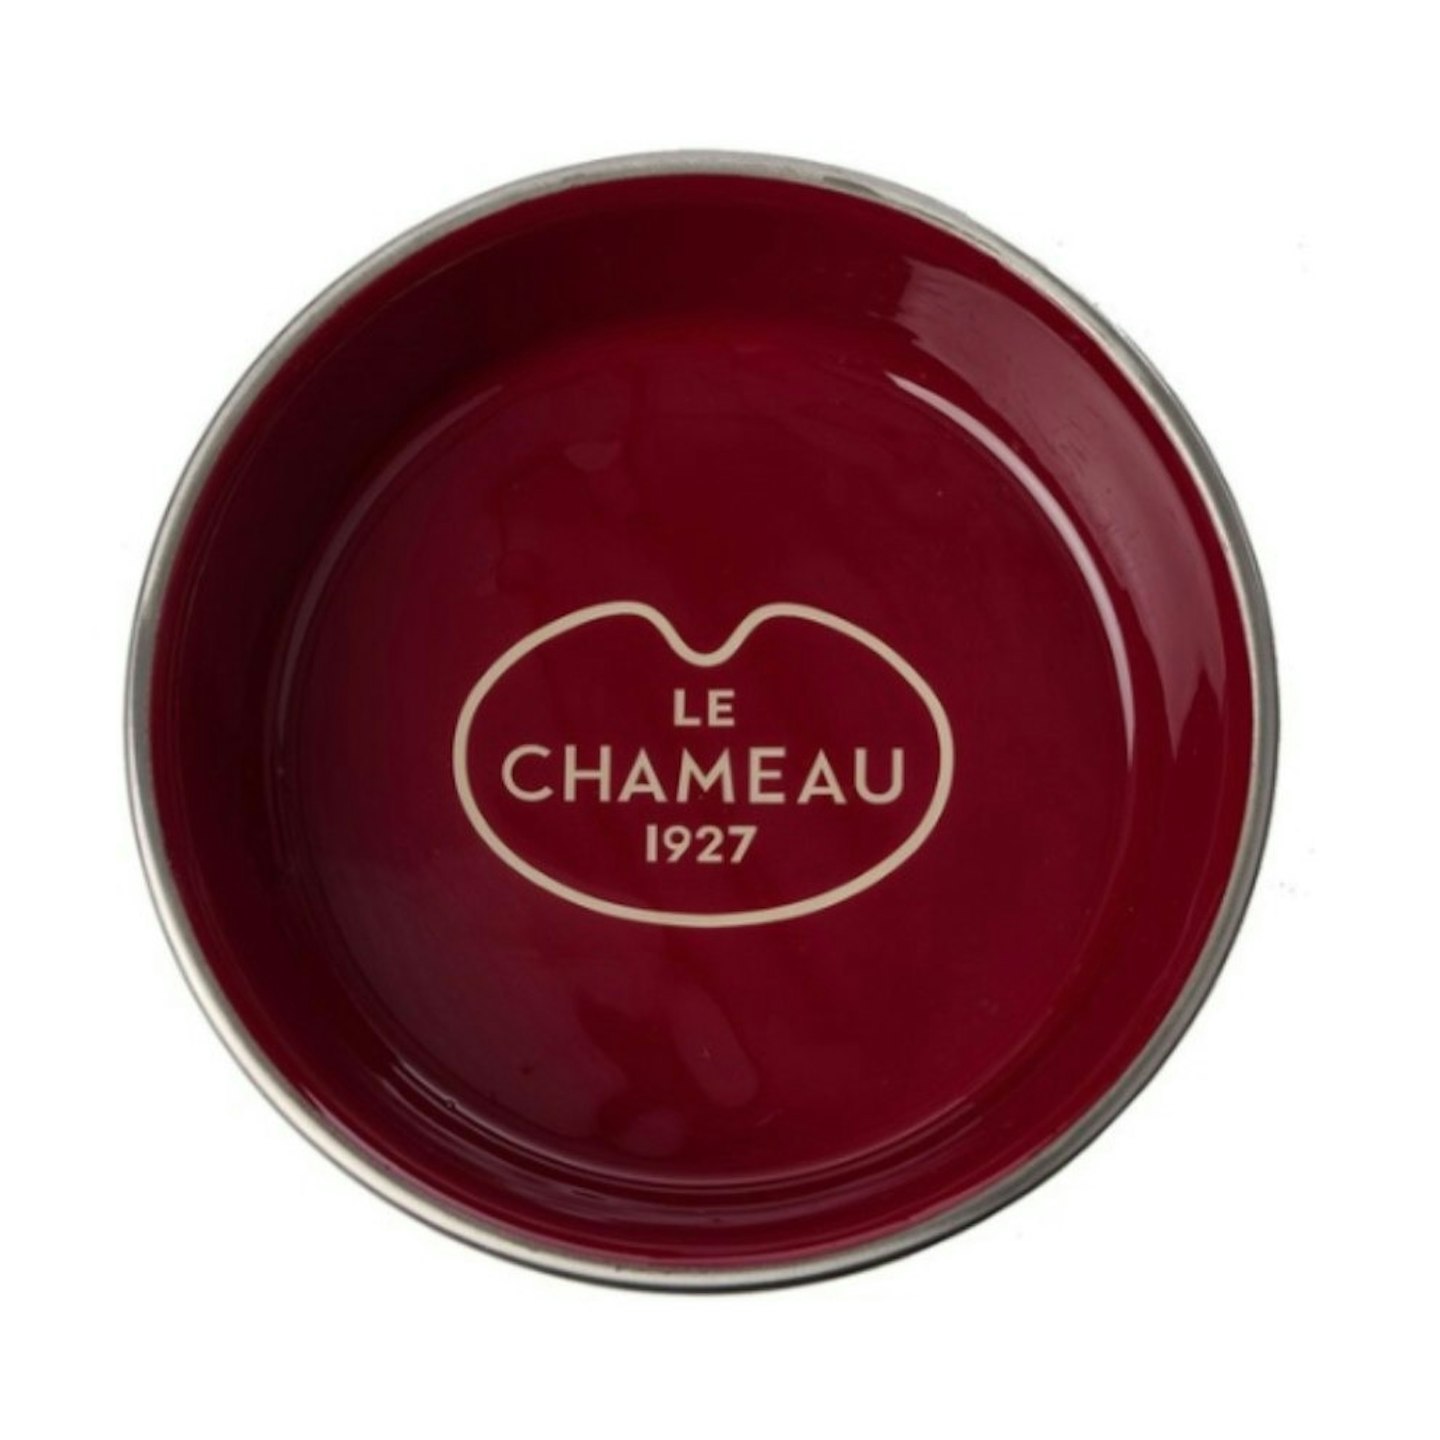 Le Chamaeu Stainless Steel Dog Bowl in Rouge